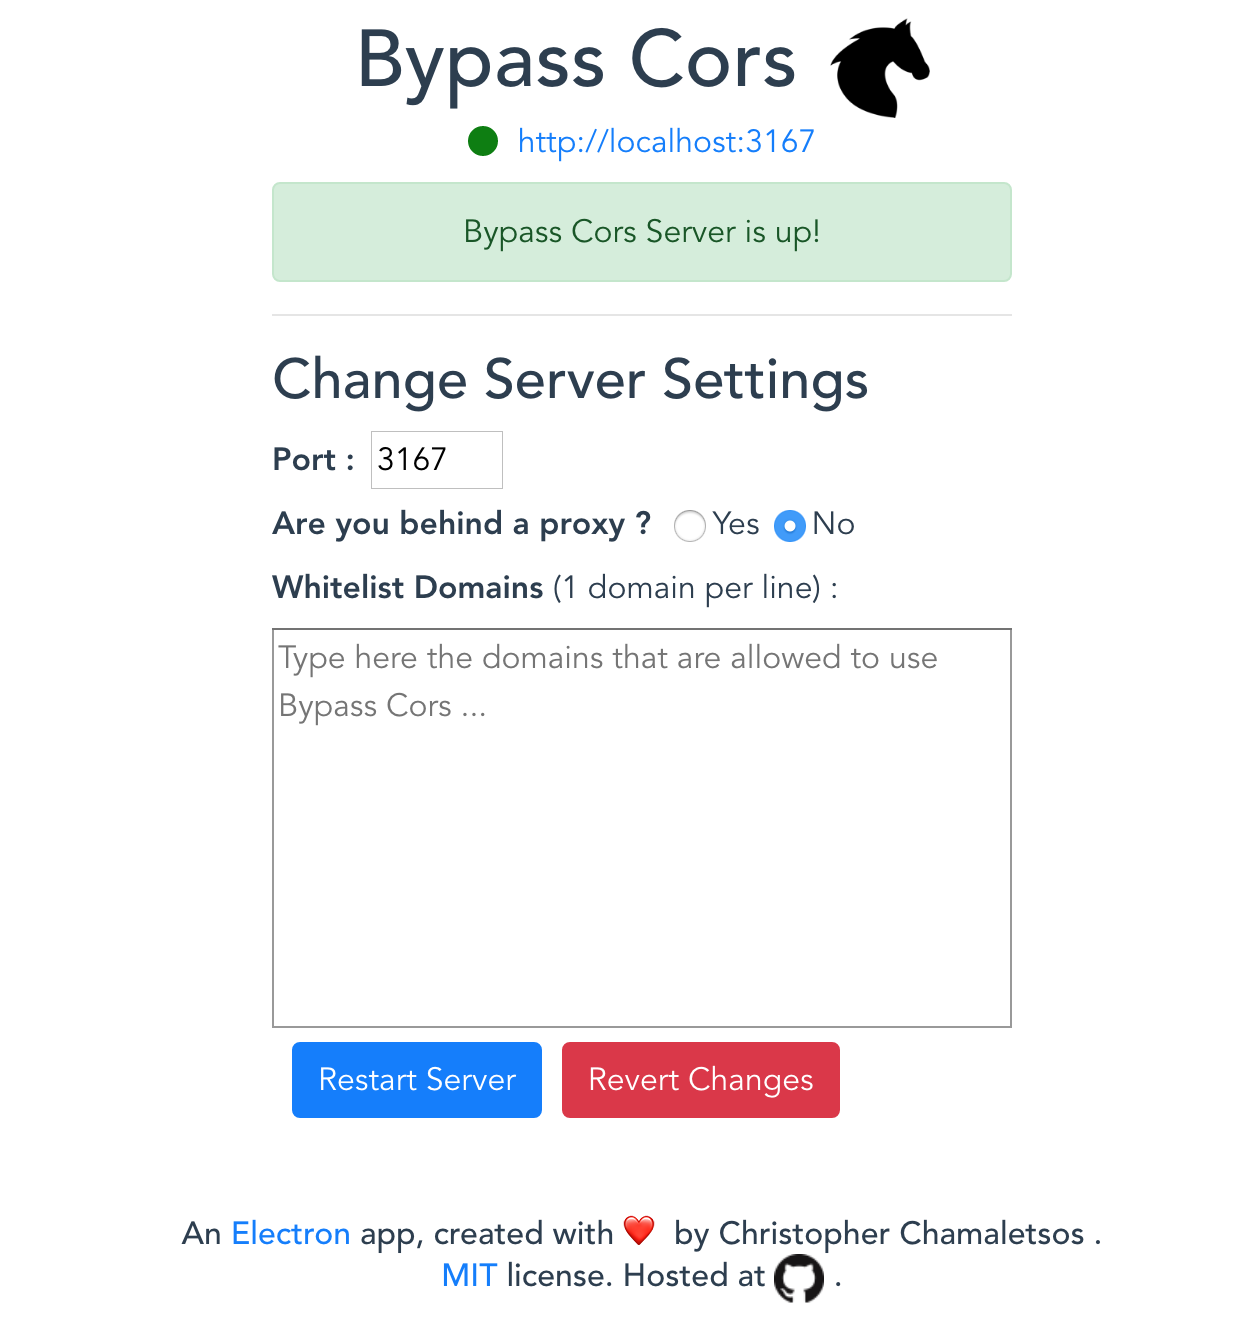 Bypass Cors app overview